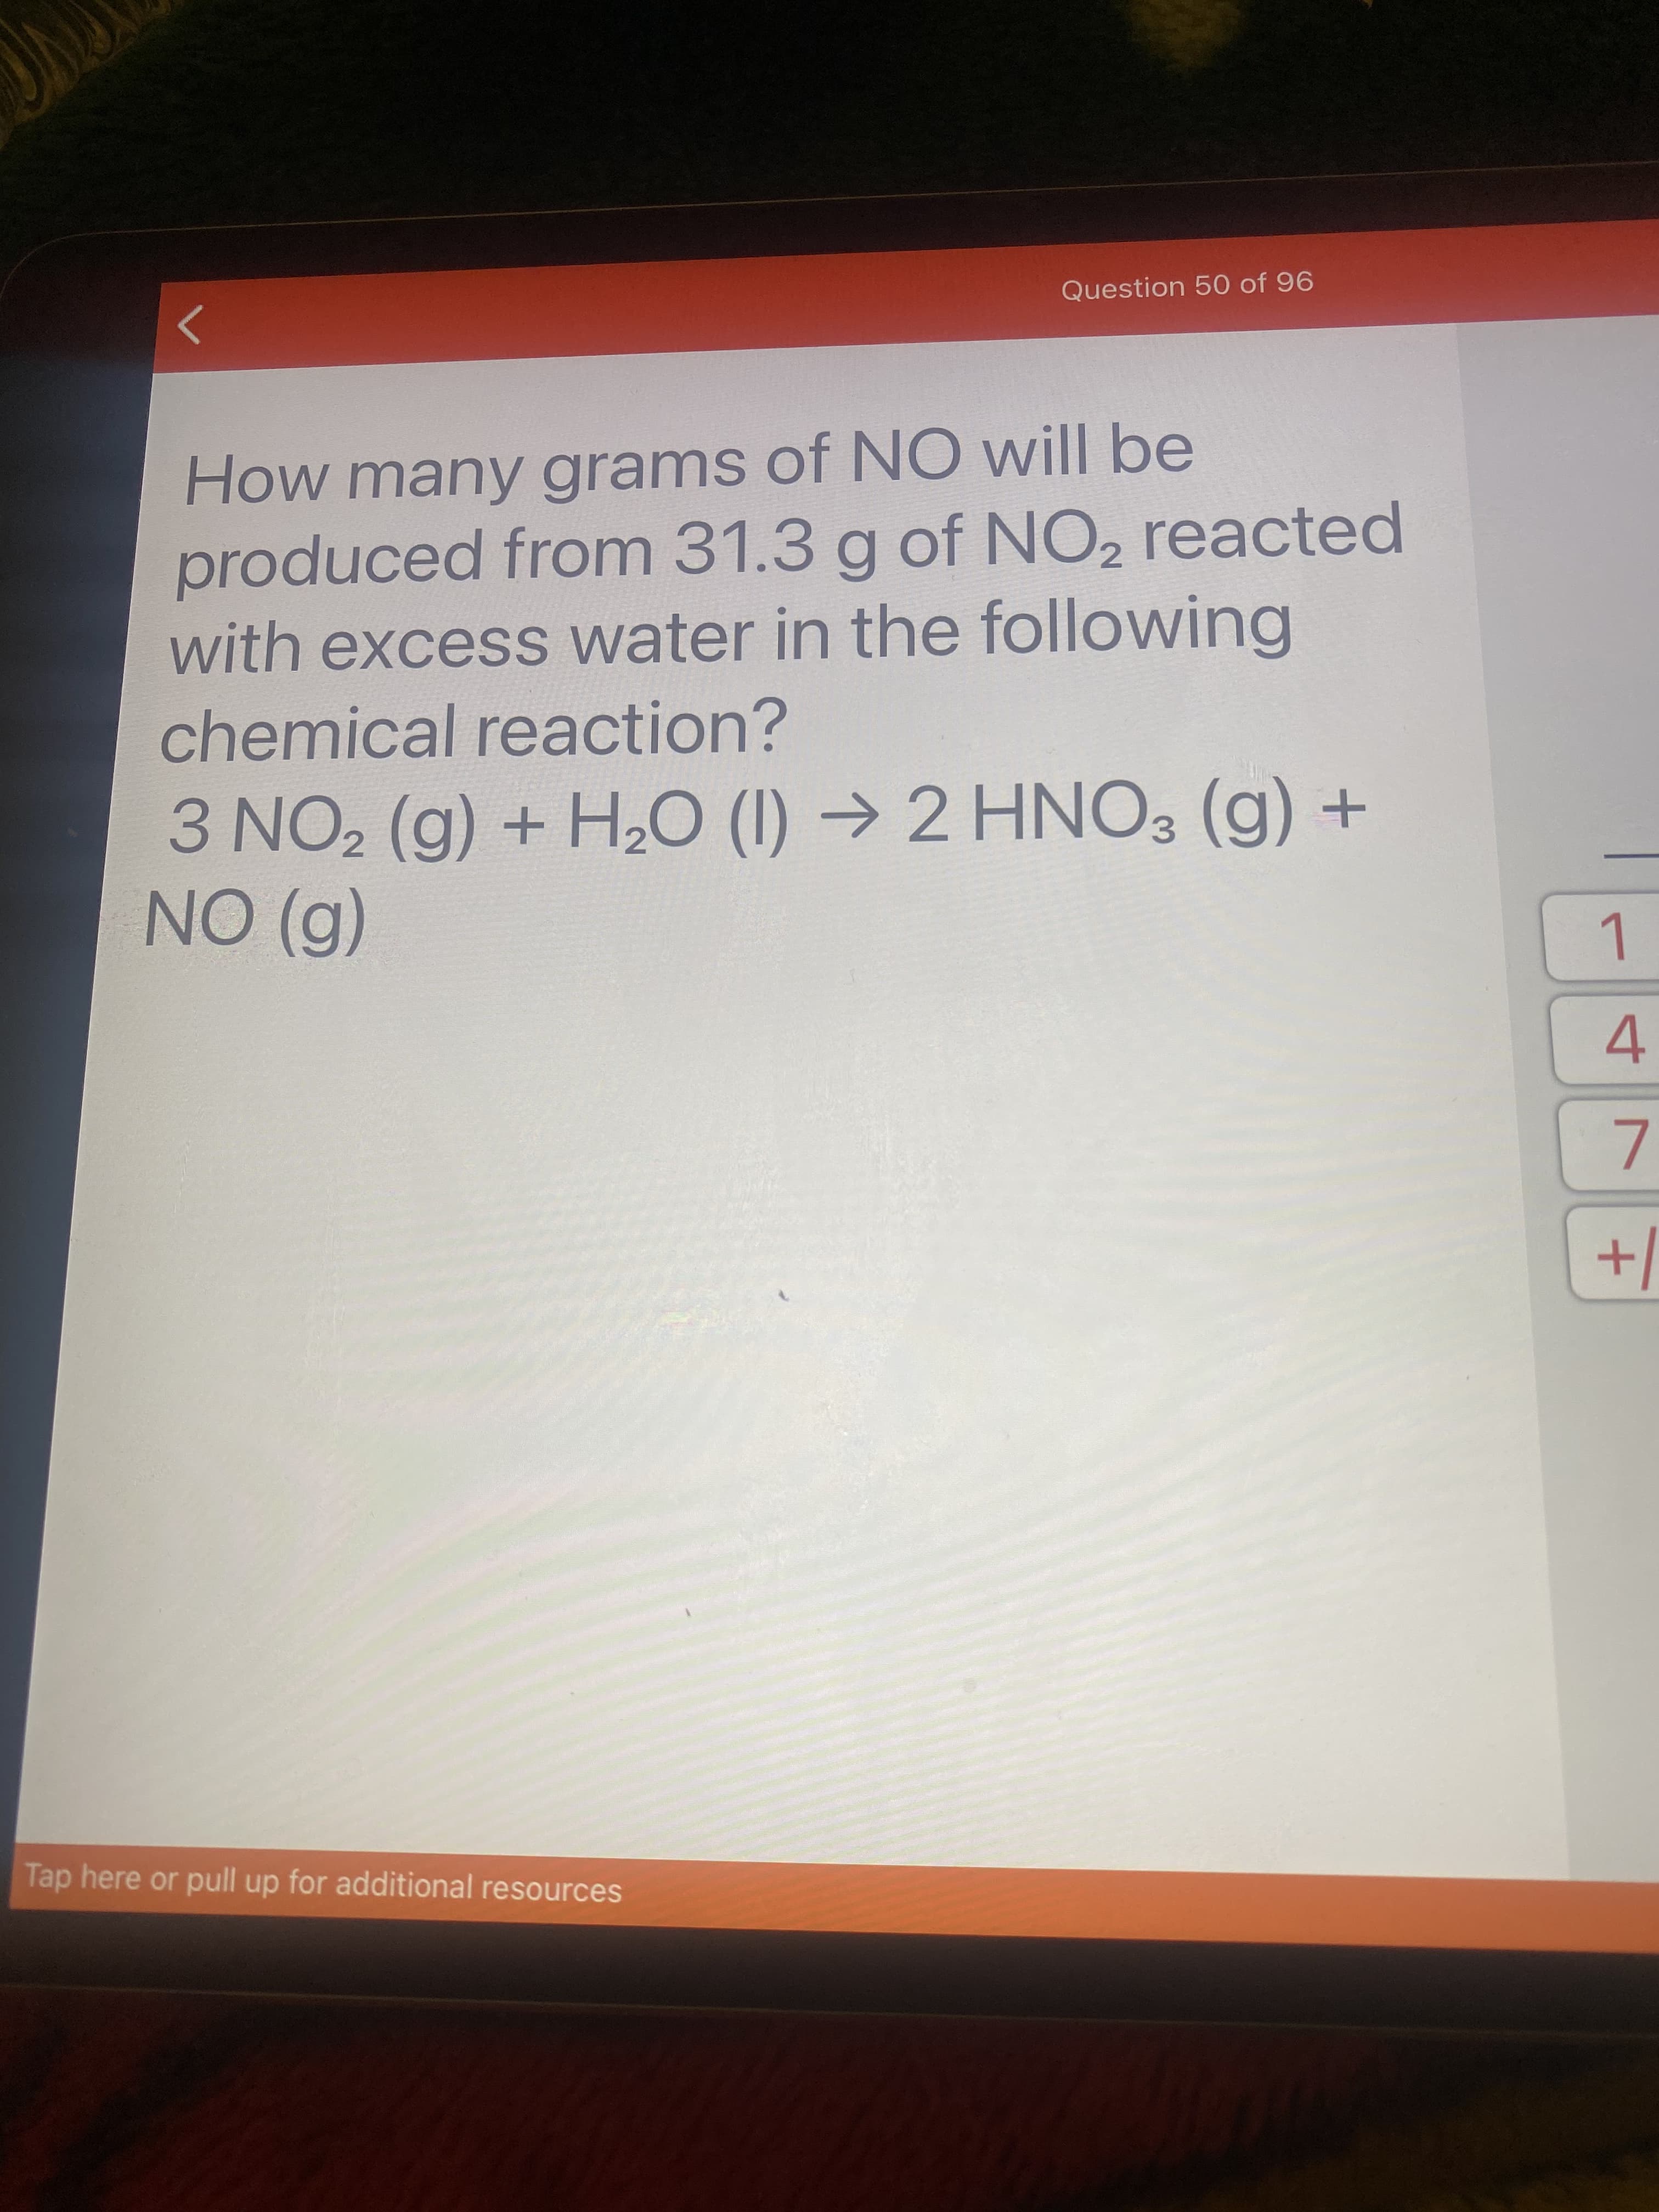 How many grams of NO will be
produced from 31.3 g of NO2 reacted
with excess water in the following
chemical reaction?
+ (6) ONH 1) 0°H + (6)ON
(6) ON
